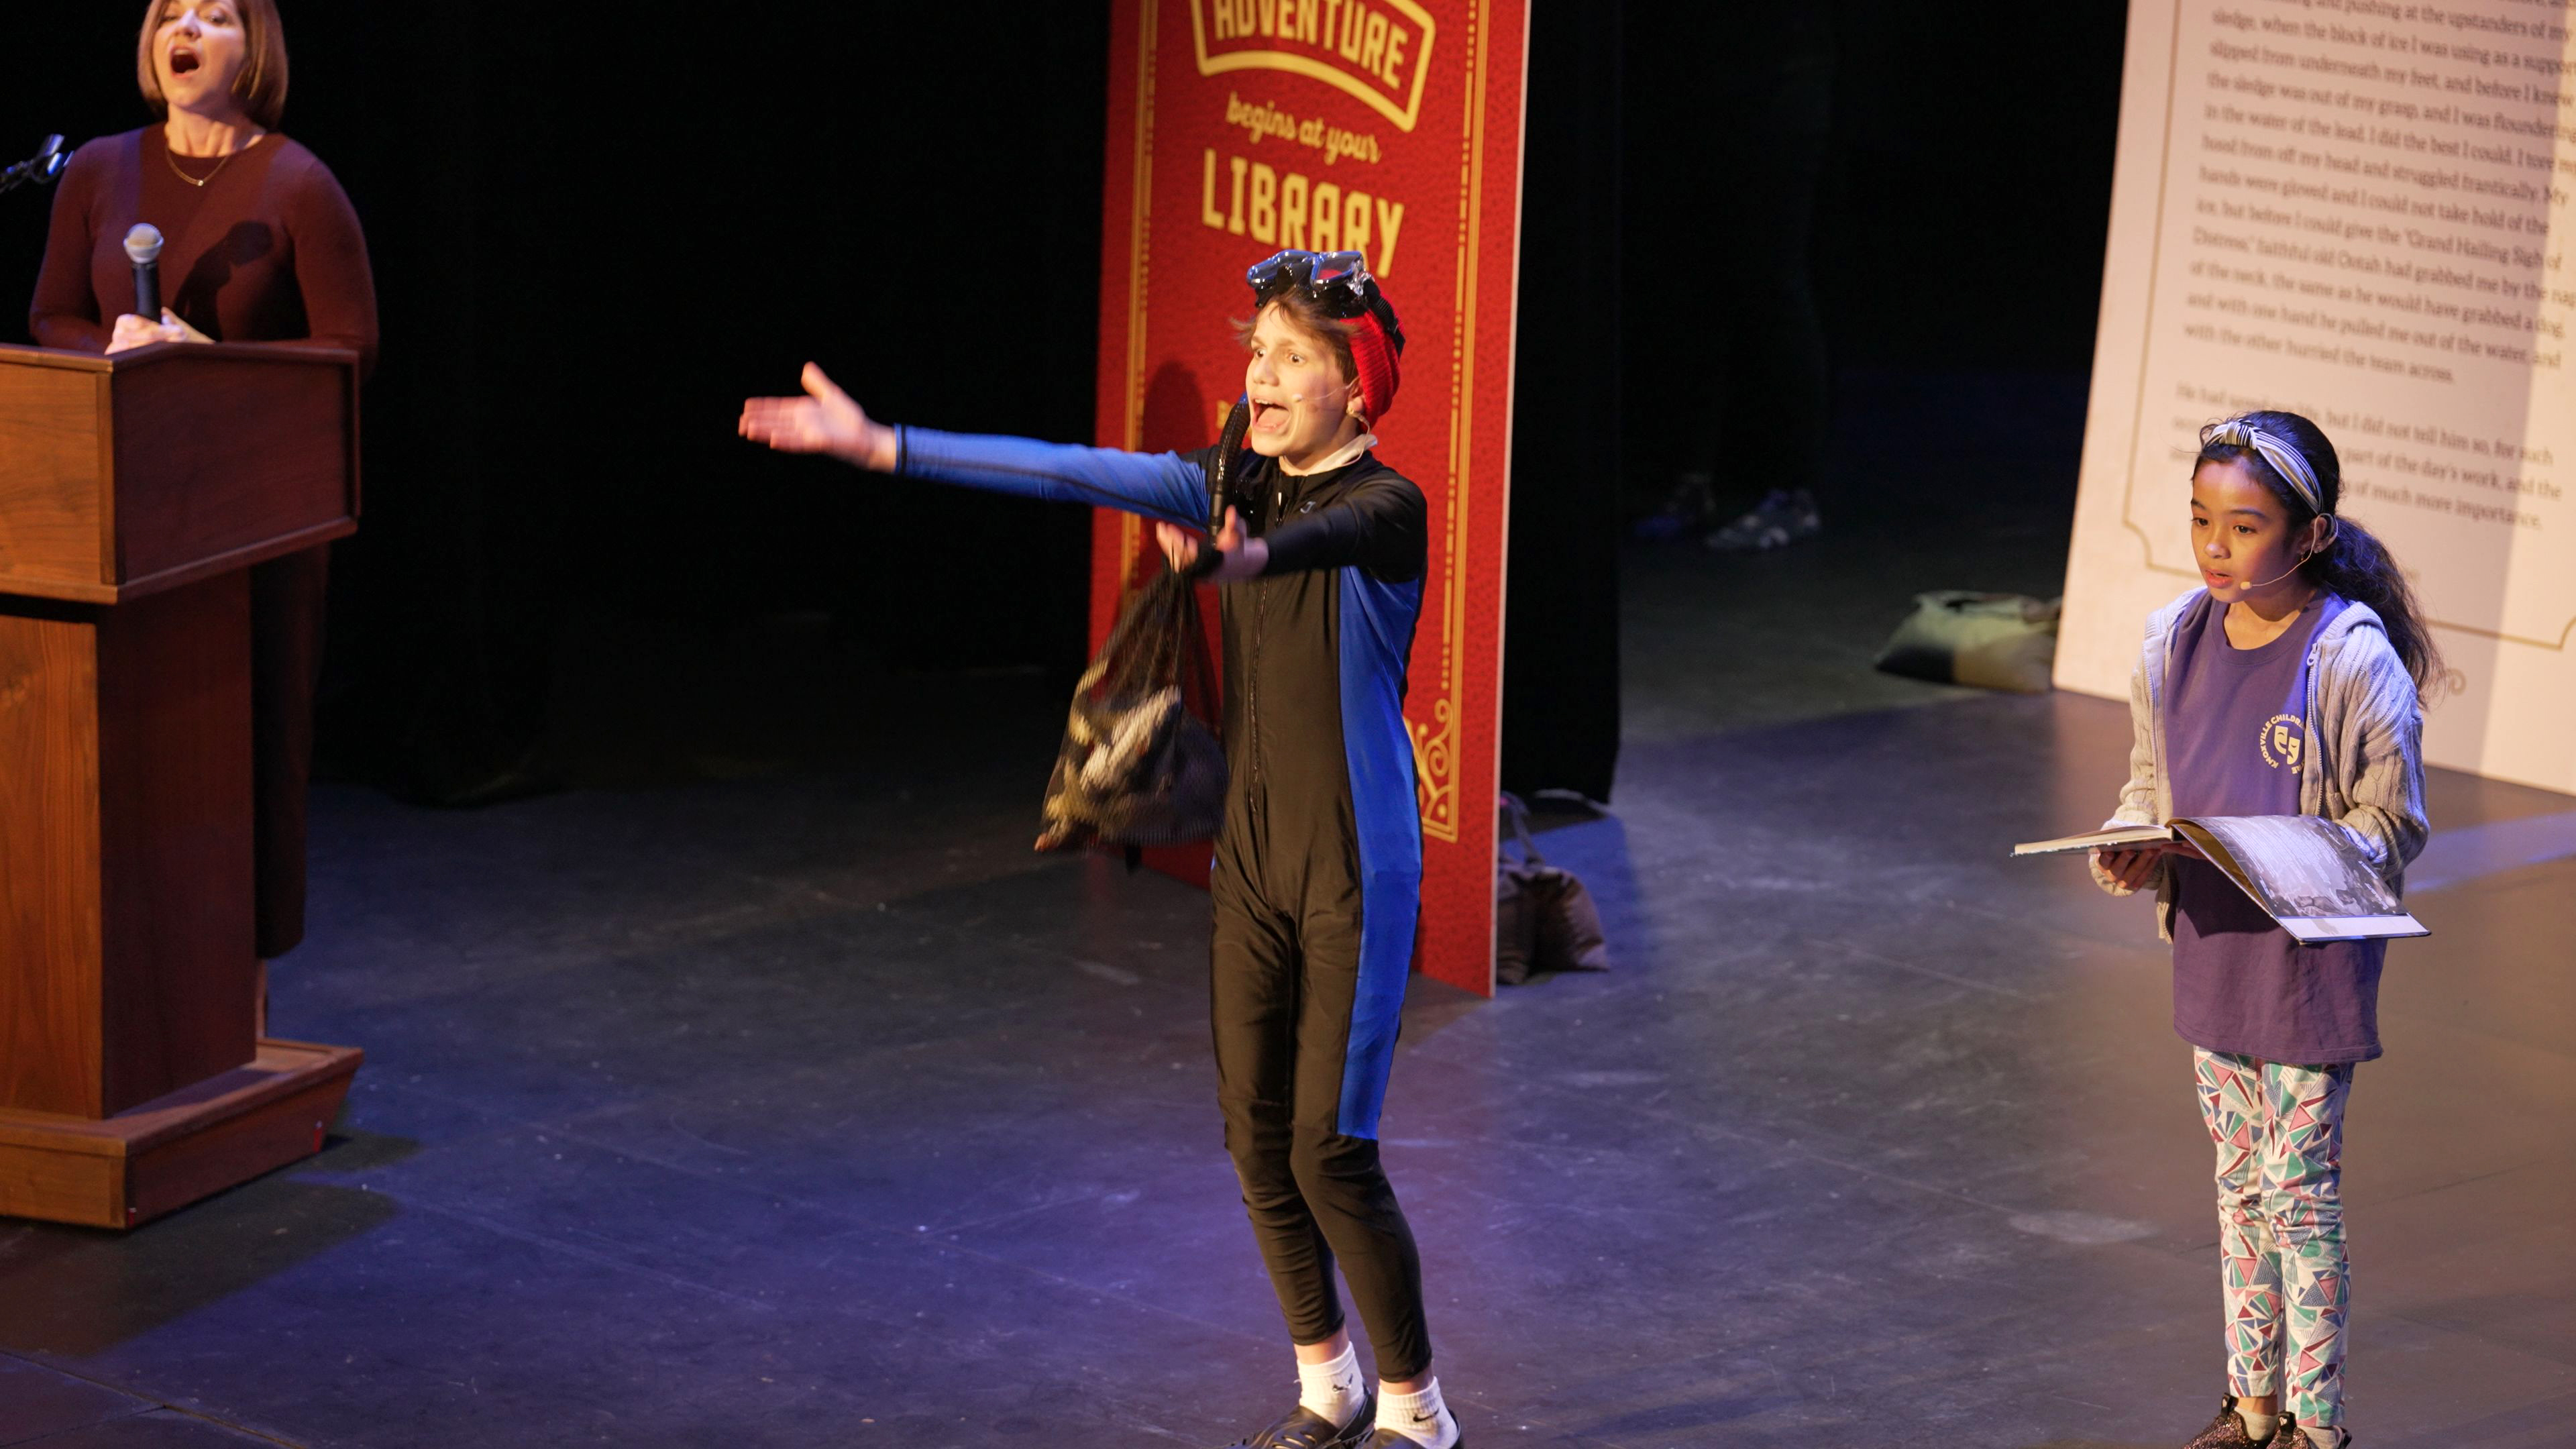 young actor on stage dressed in a scuba costume with young girl holding an open book